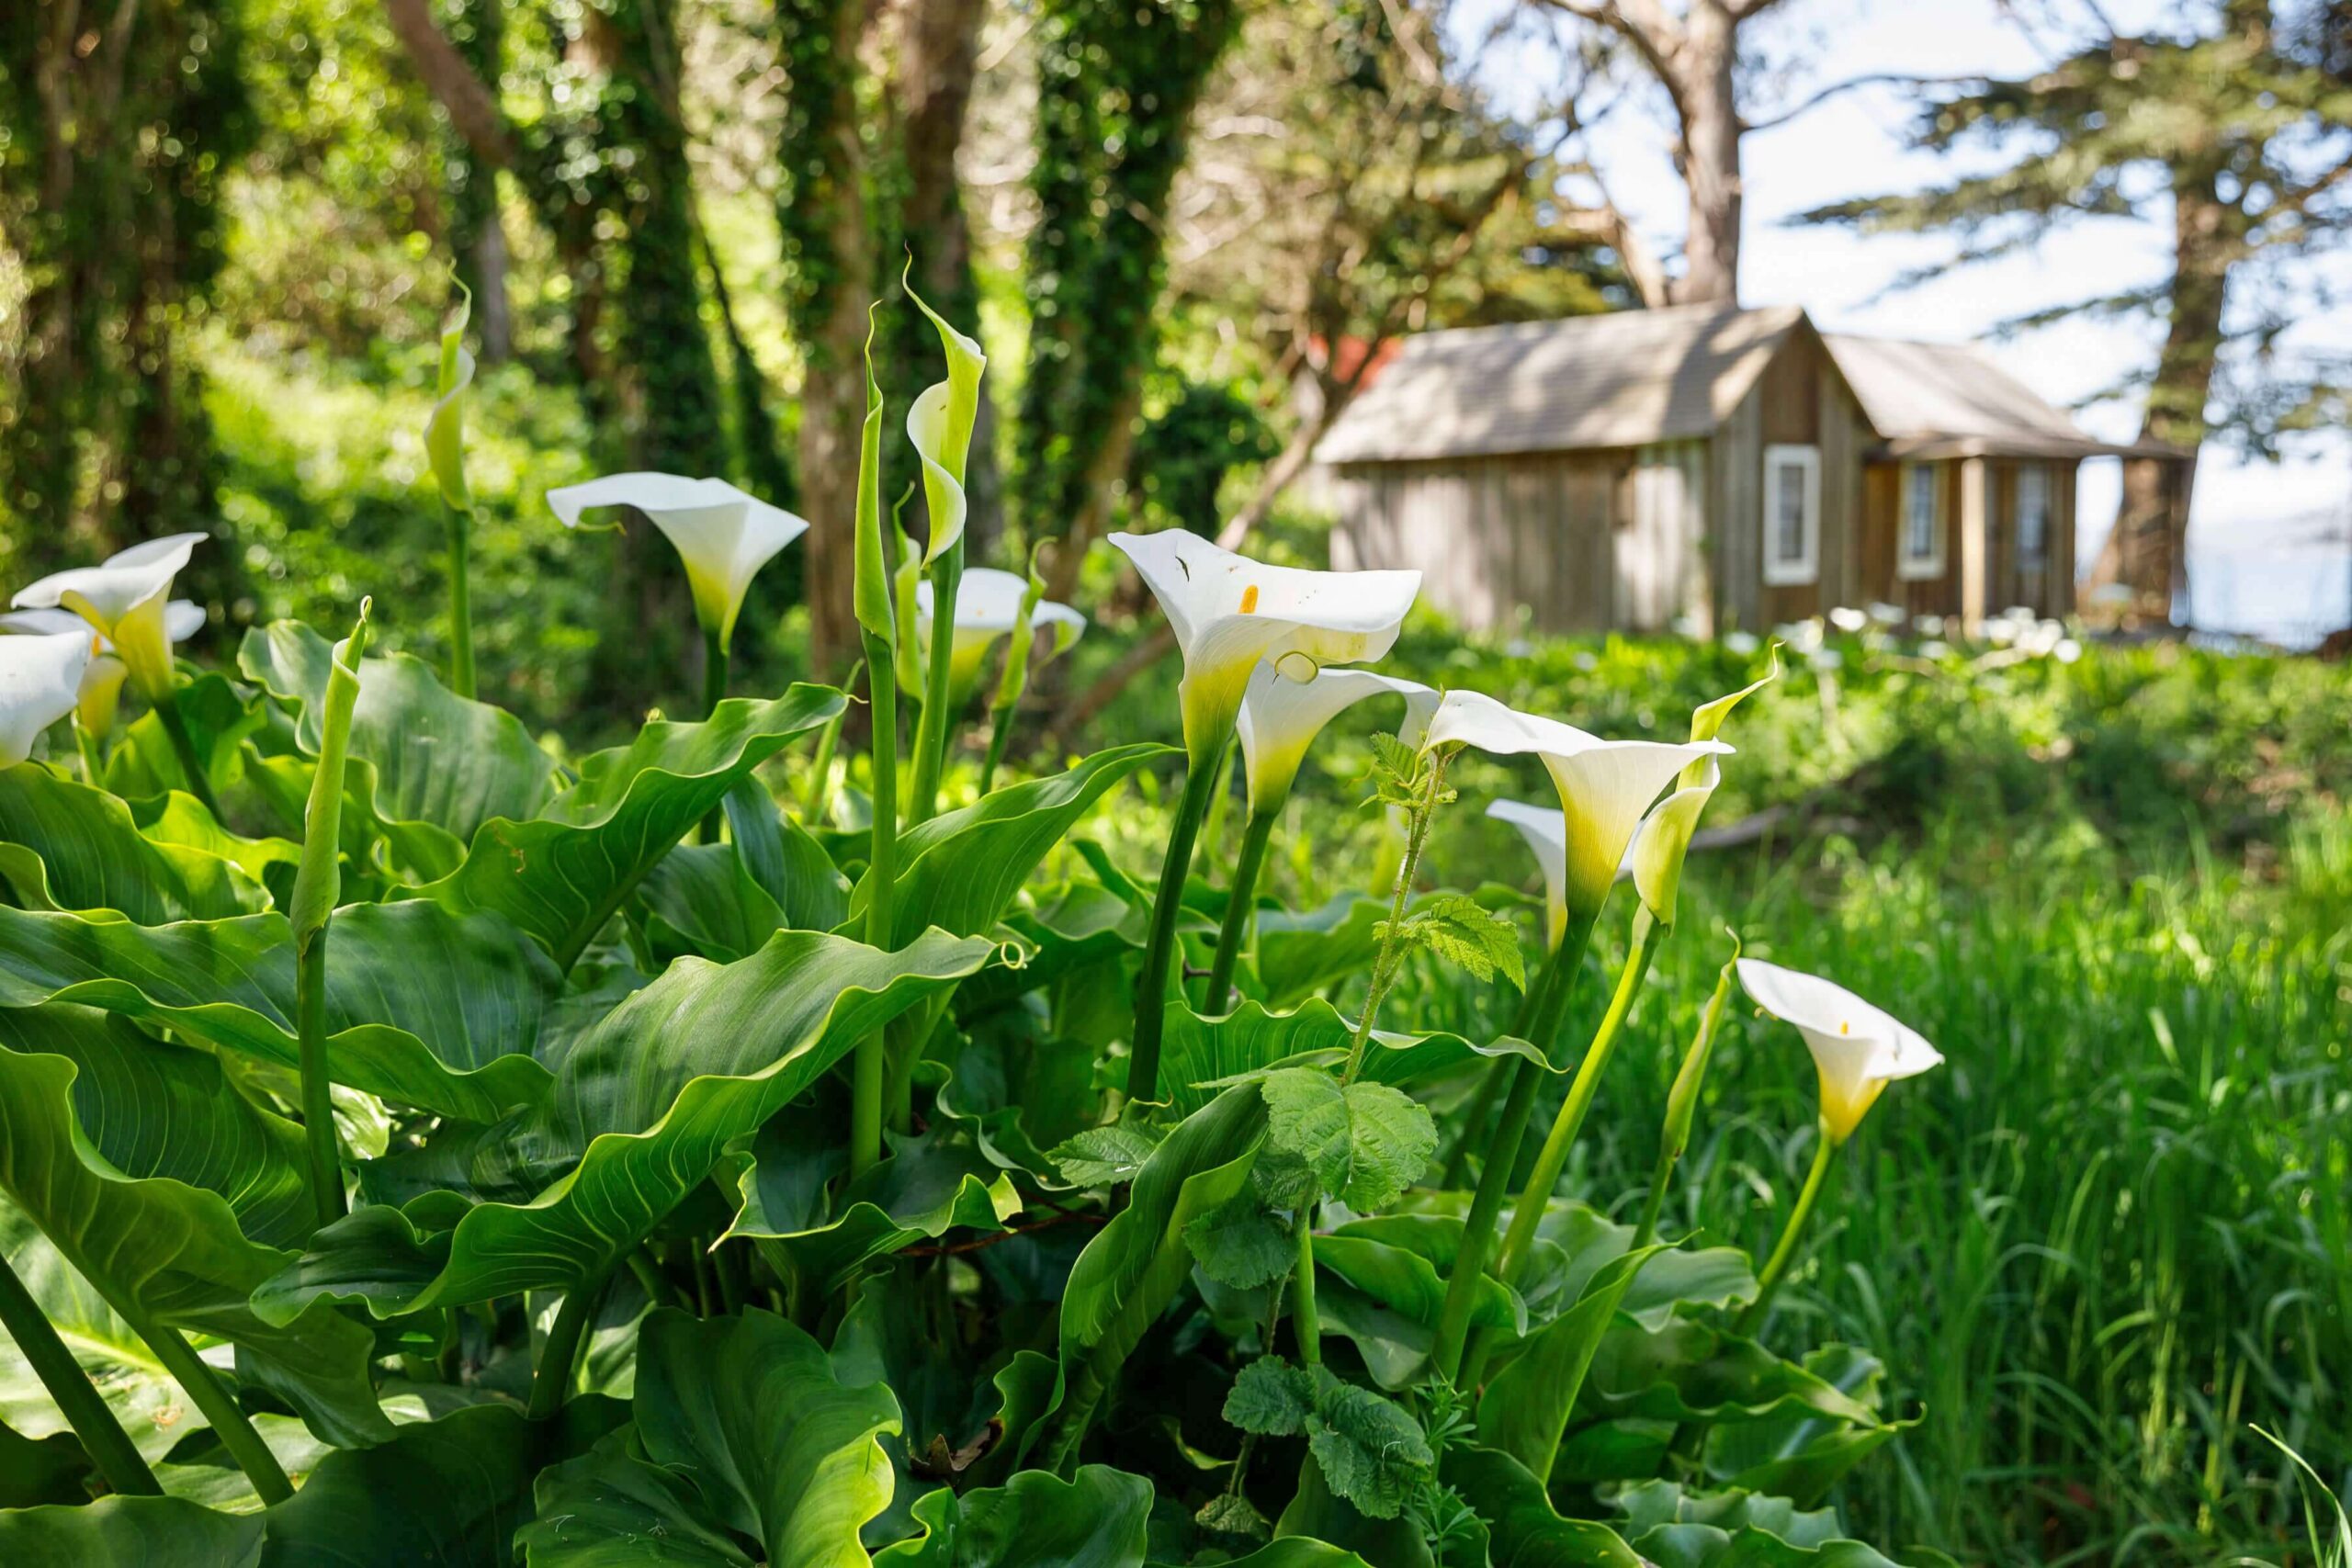 Greenery and white flowers in the foreground with a small wooden cabin out of focus in the background.